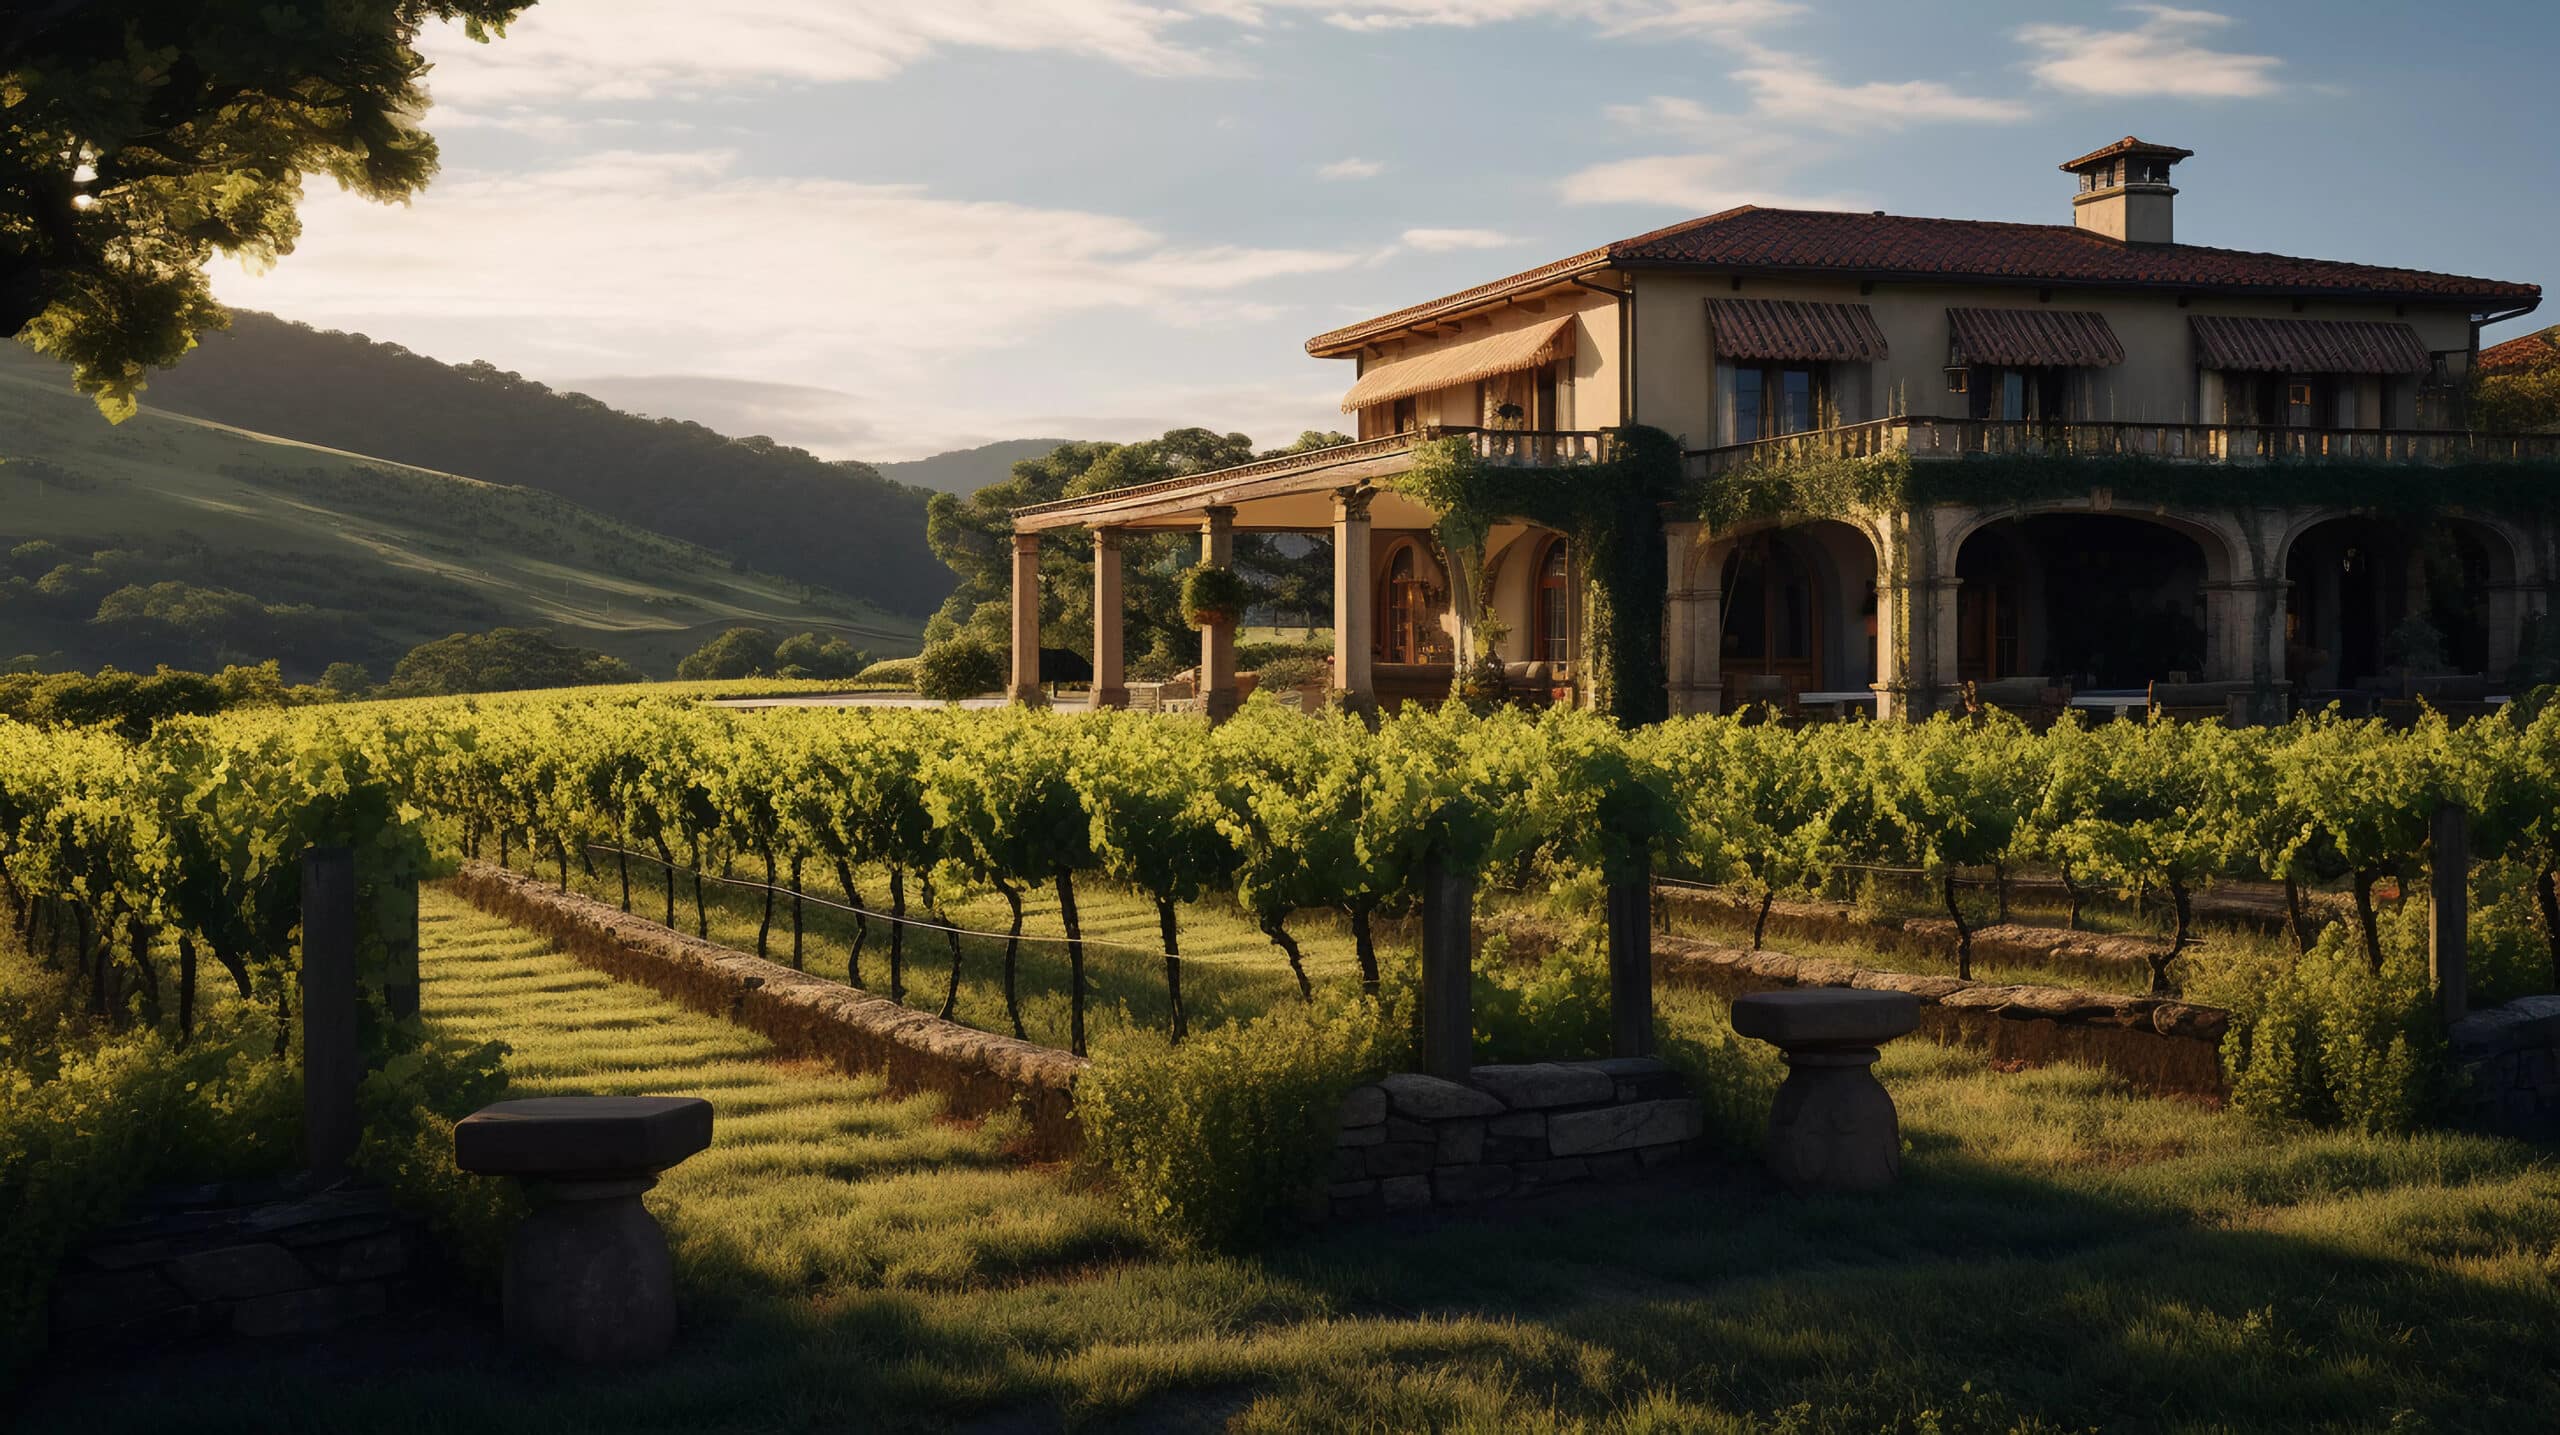 Sun-kissed Napa vineyard with secure estate in the background, under Global Risk Solutions' vigilant protection.